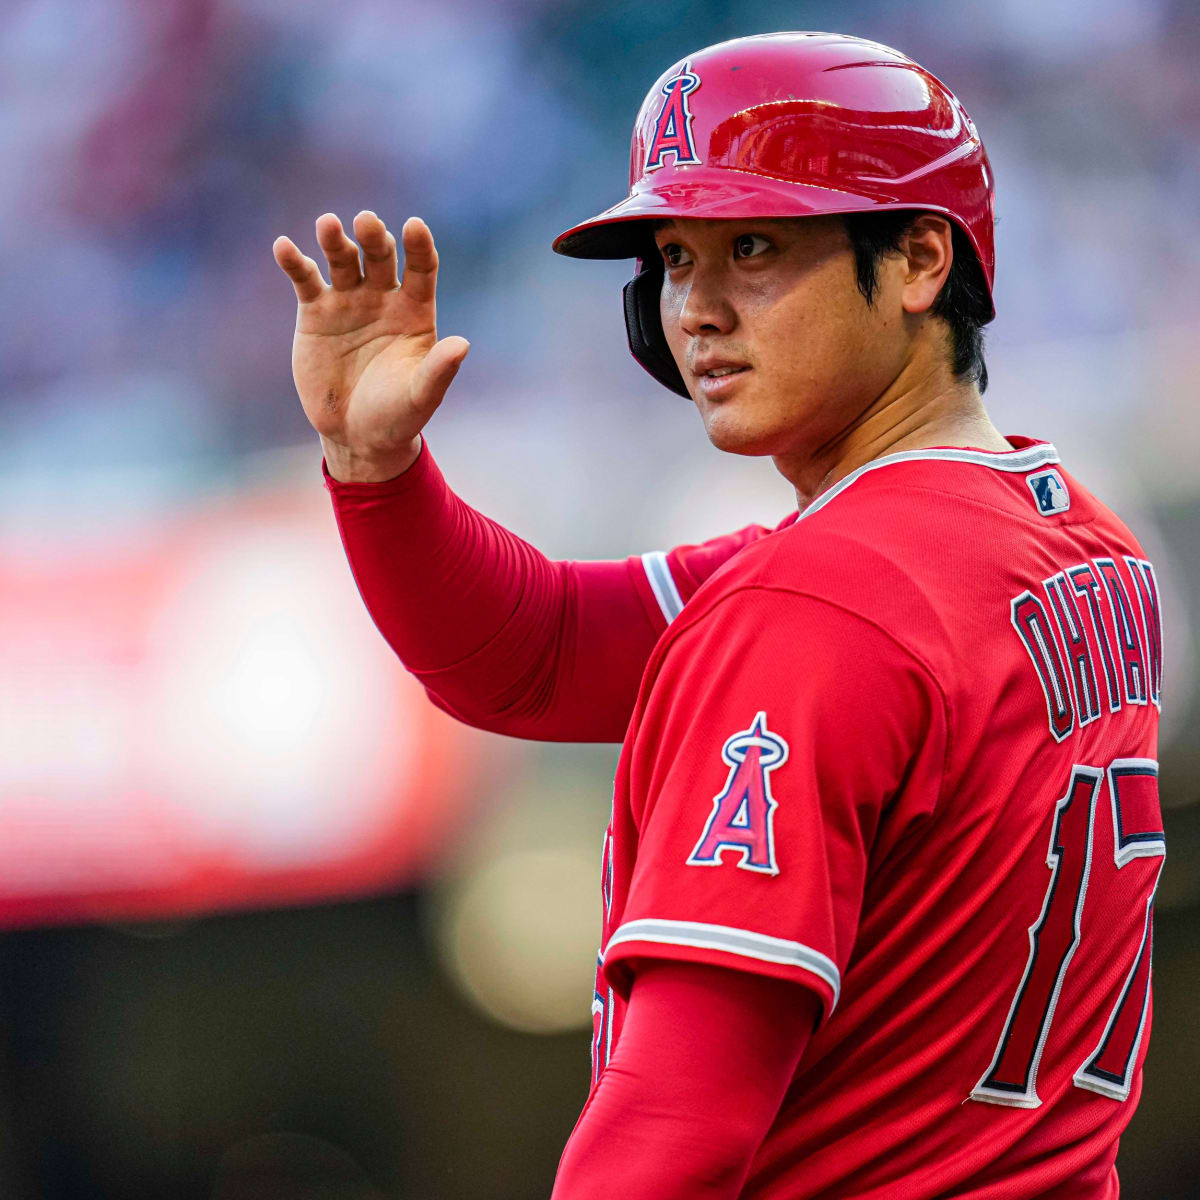 Shohei Ohtani Los Angeles Angels Majestic Youth Official Cool Base